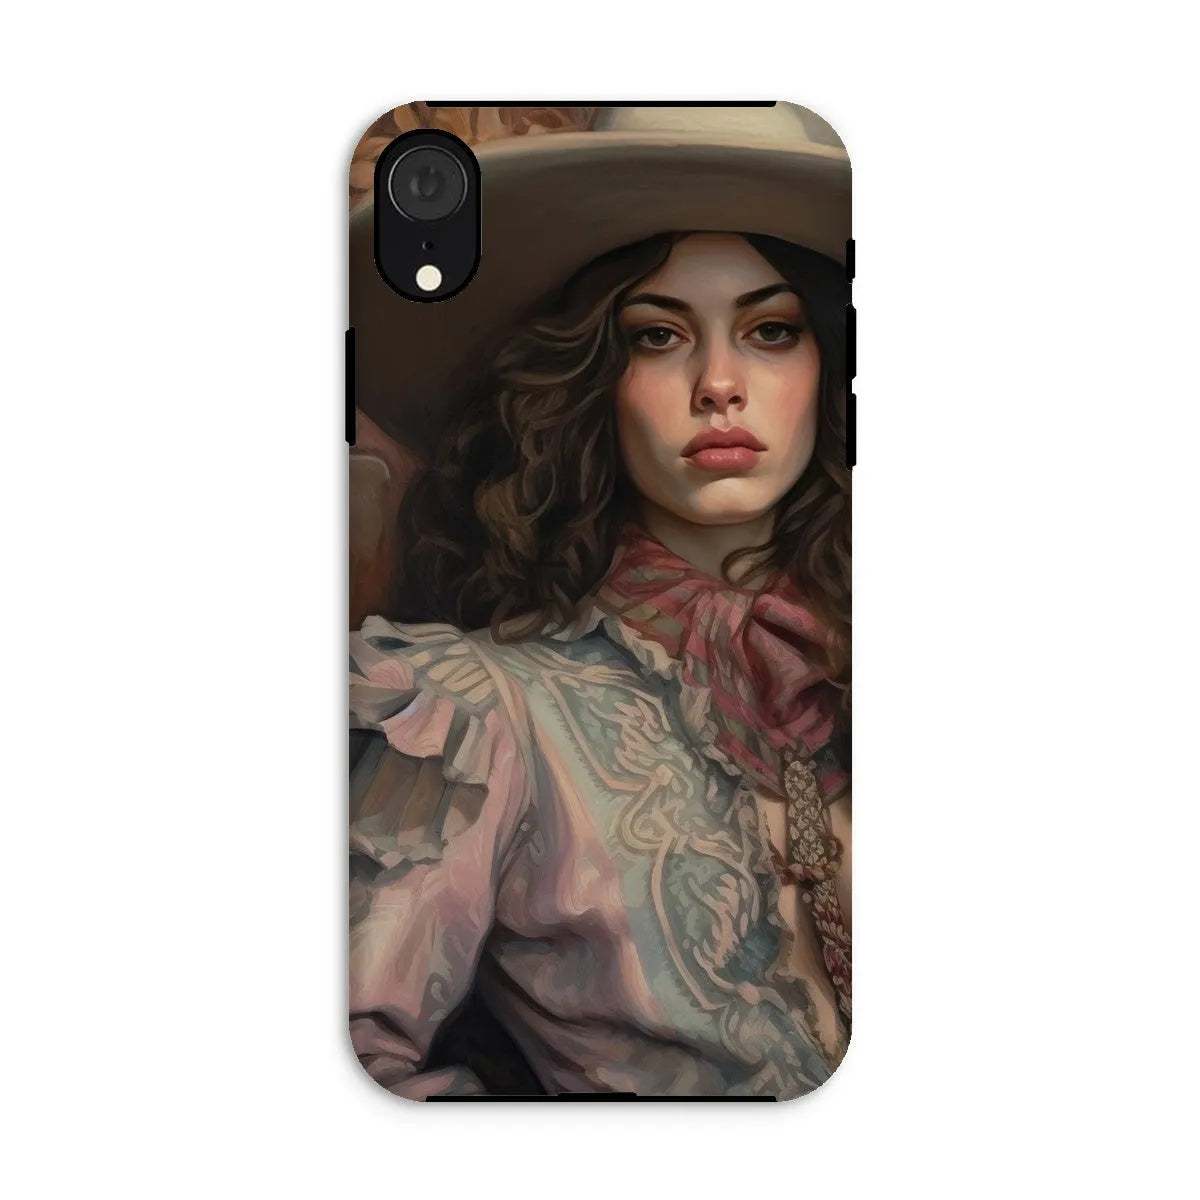 Alex The Lesbian Cowgirl - Sapphic Art Phone Case - Iphone Xr / Matte - Mobile Phone Cases - Aesthetic Art